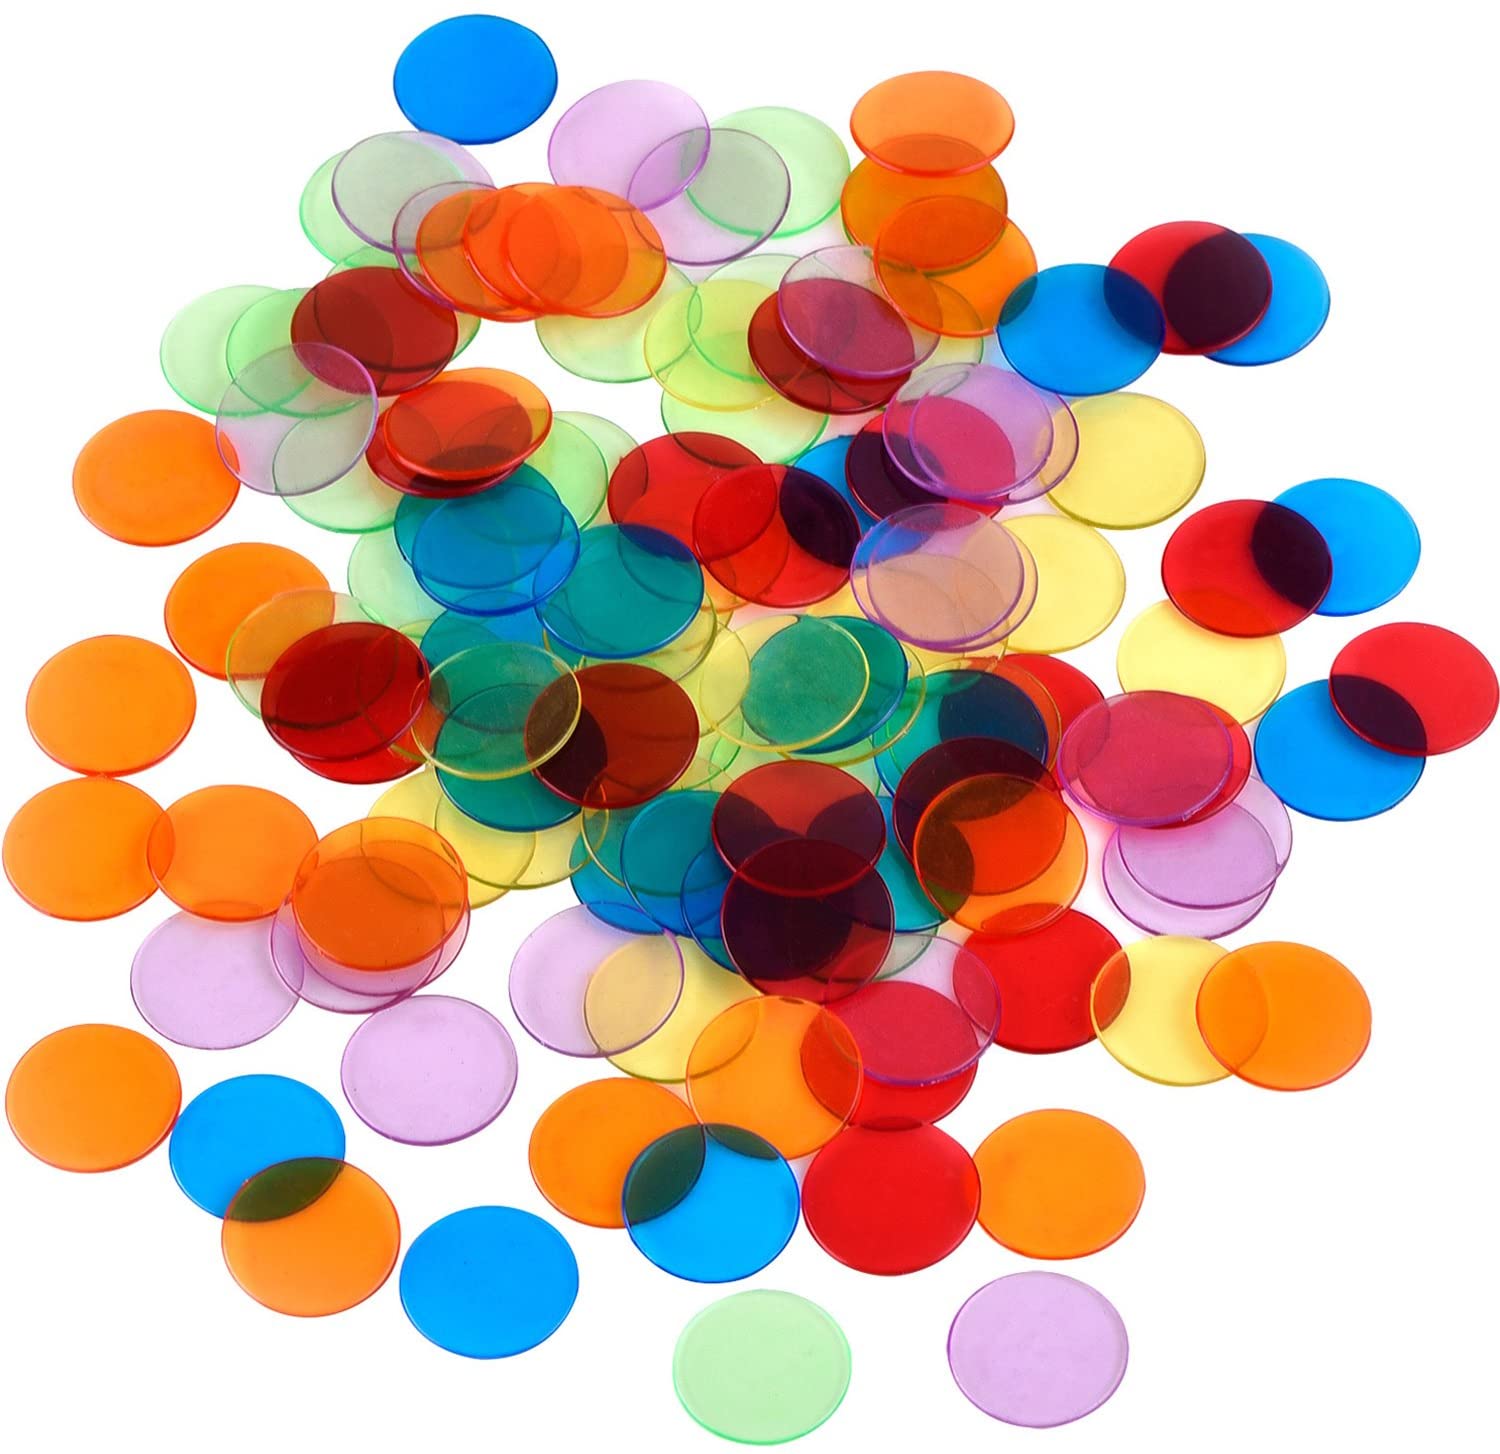 120 Pieces Transparent Color Counters Counting Bingo Chips Plastic Markers with Storage Bag (Multicolored)